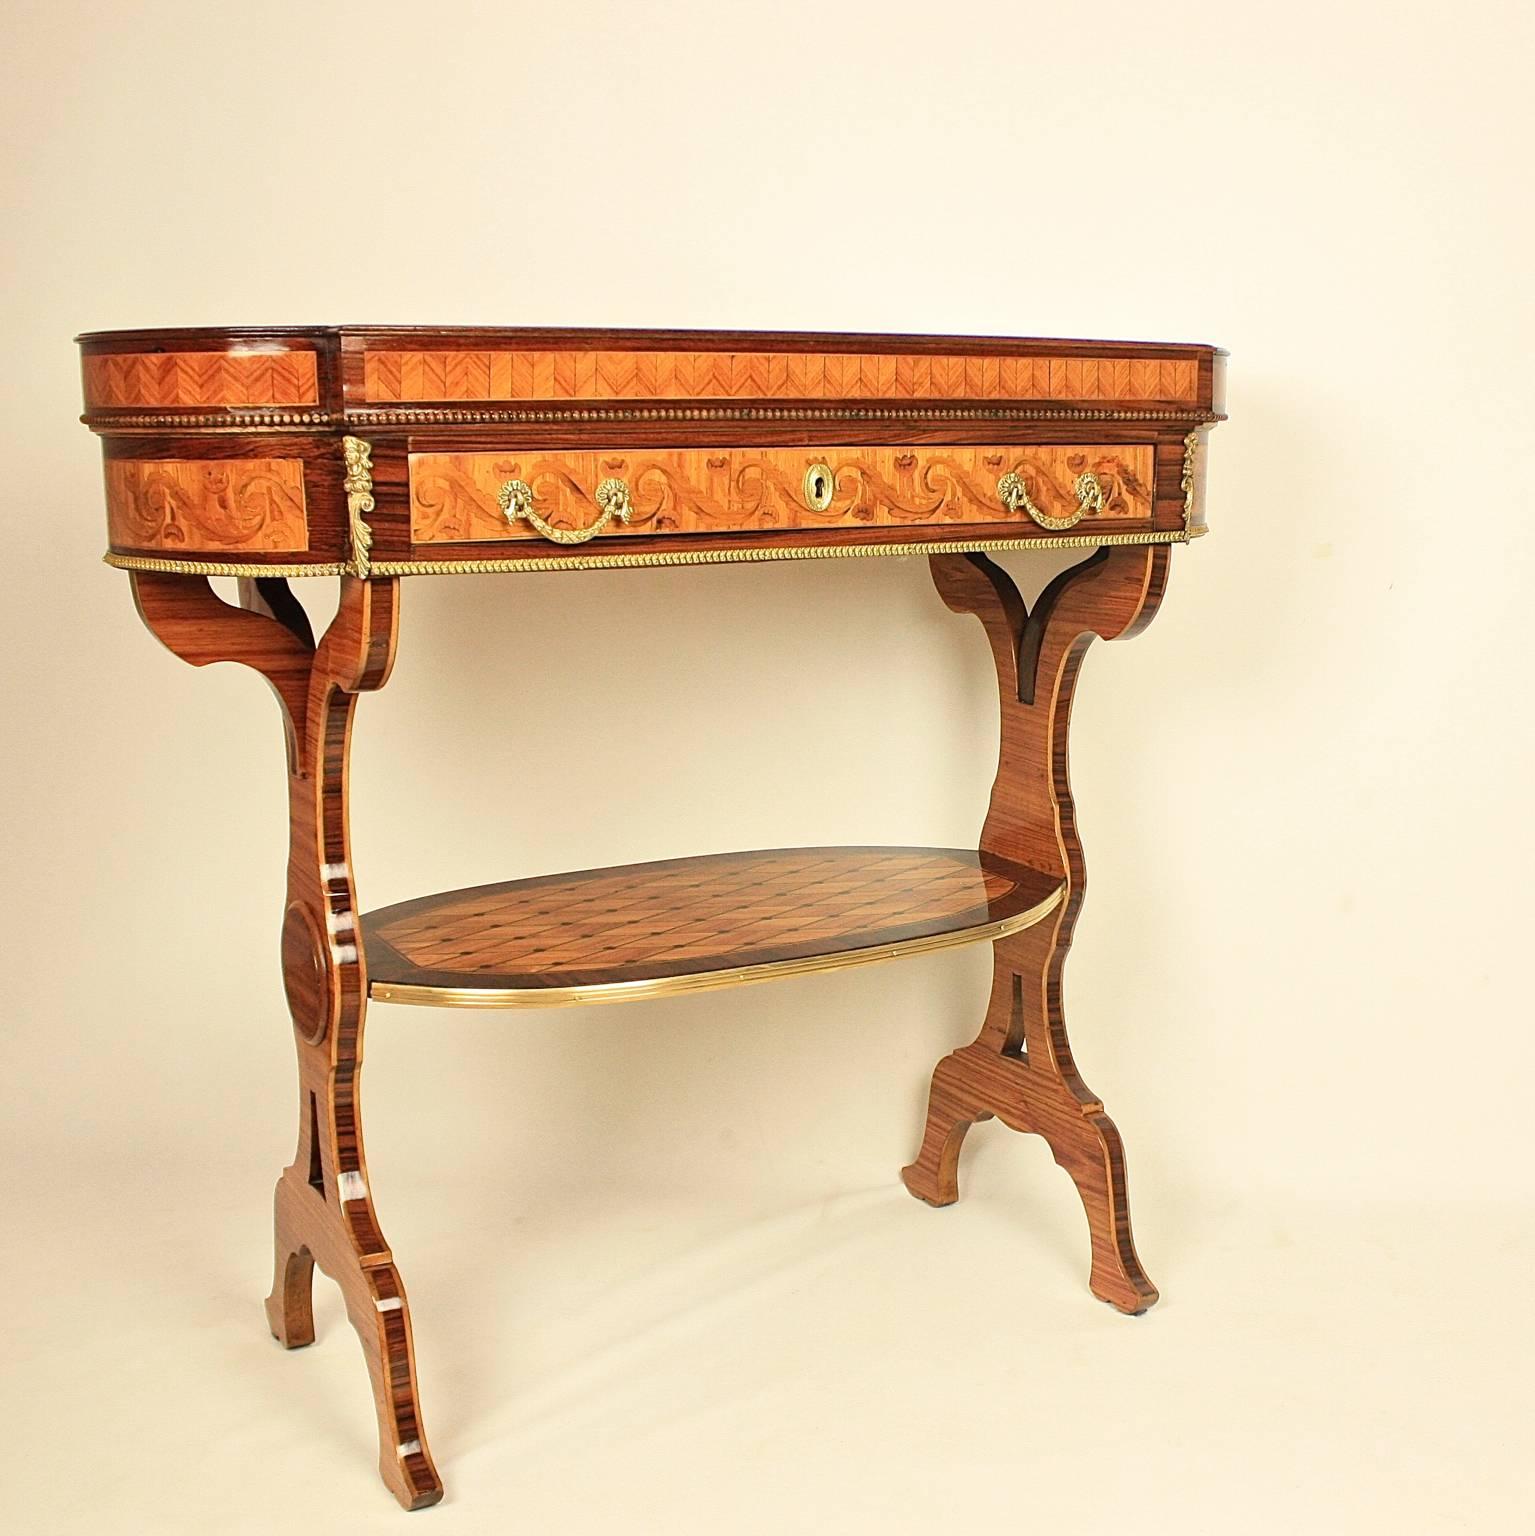 A magnificent 19th century marquetry oval side table based on a design by J. H. Riesener (1734-1806.) A remarkably similar oval side table was only recently pictured at Buckingham Palace when Theresa May was formally appointed Britain's prime